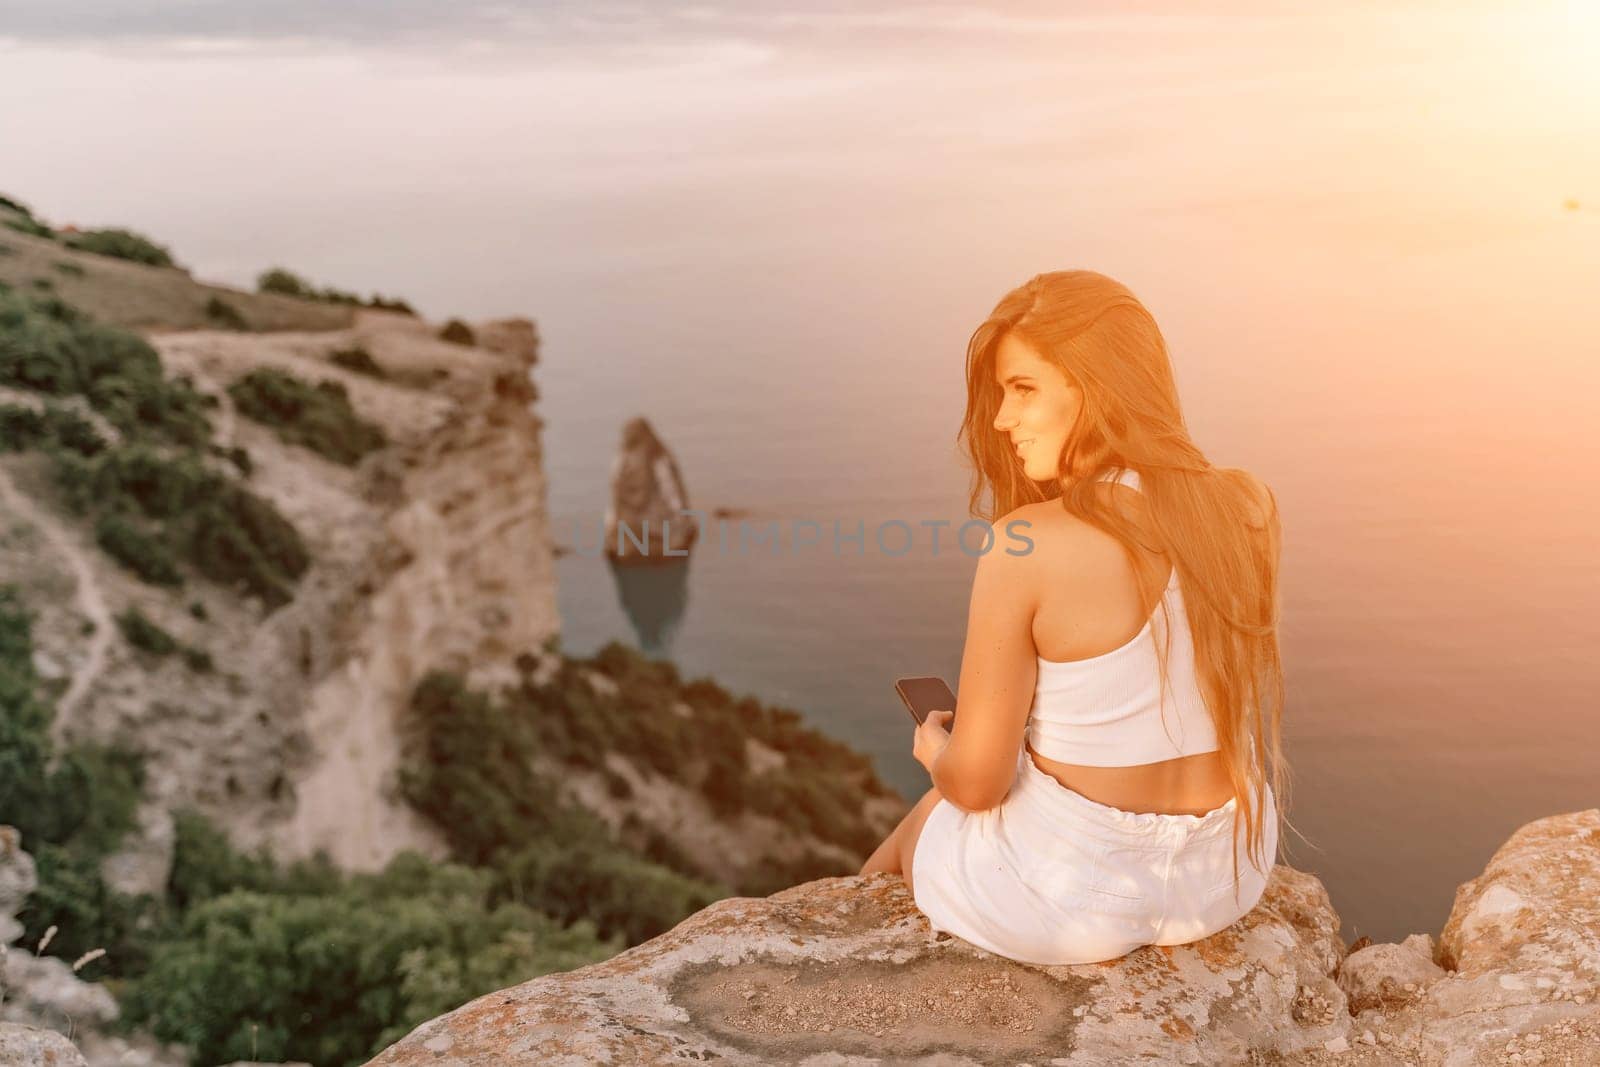 A portrait of a woman in white shorts and T-shirt with long hair, standing against the sea, showcasing her joyful and contented mood